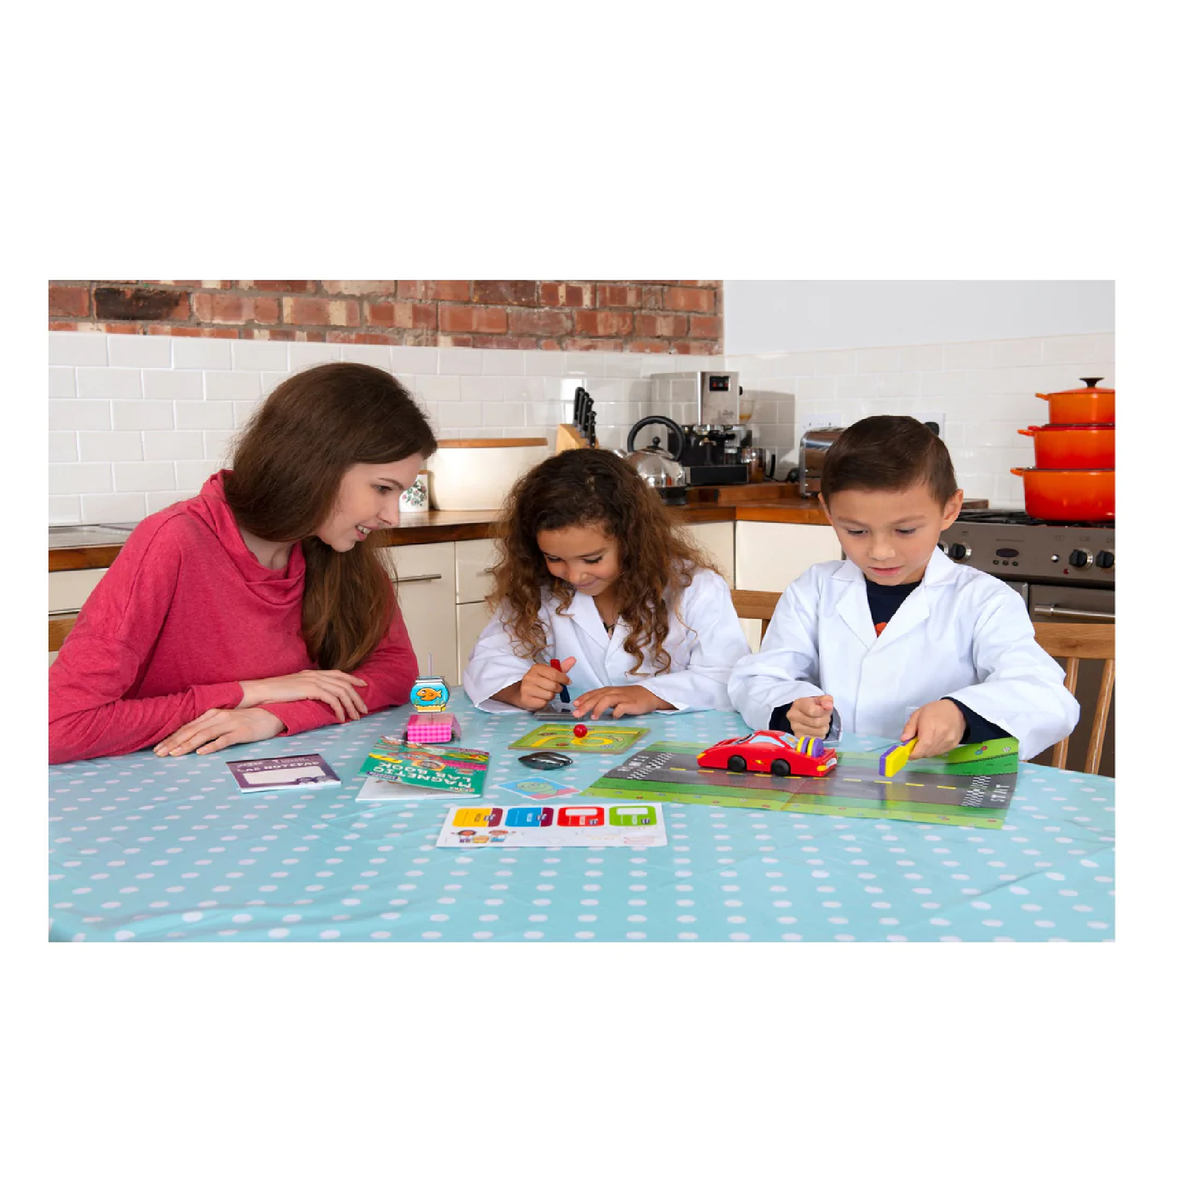 Galt Magnetic Glow Lab, Science Educational Learning Toys, 6 years +, 1004867